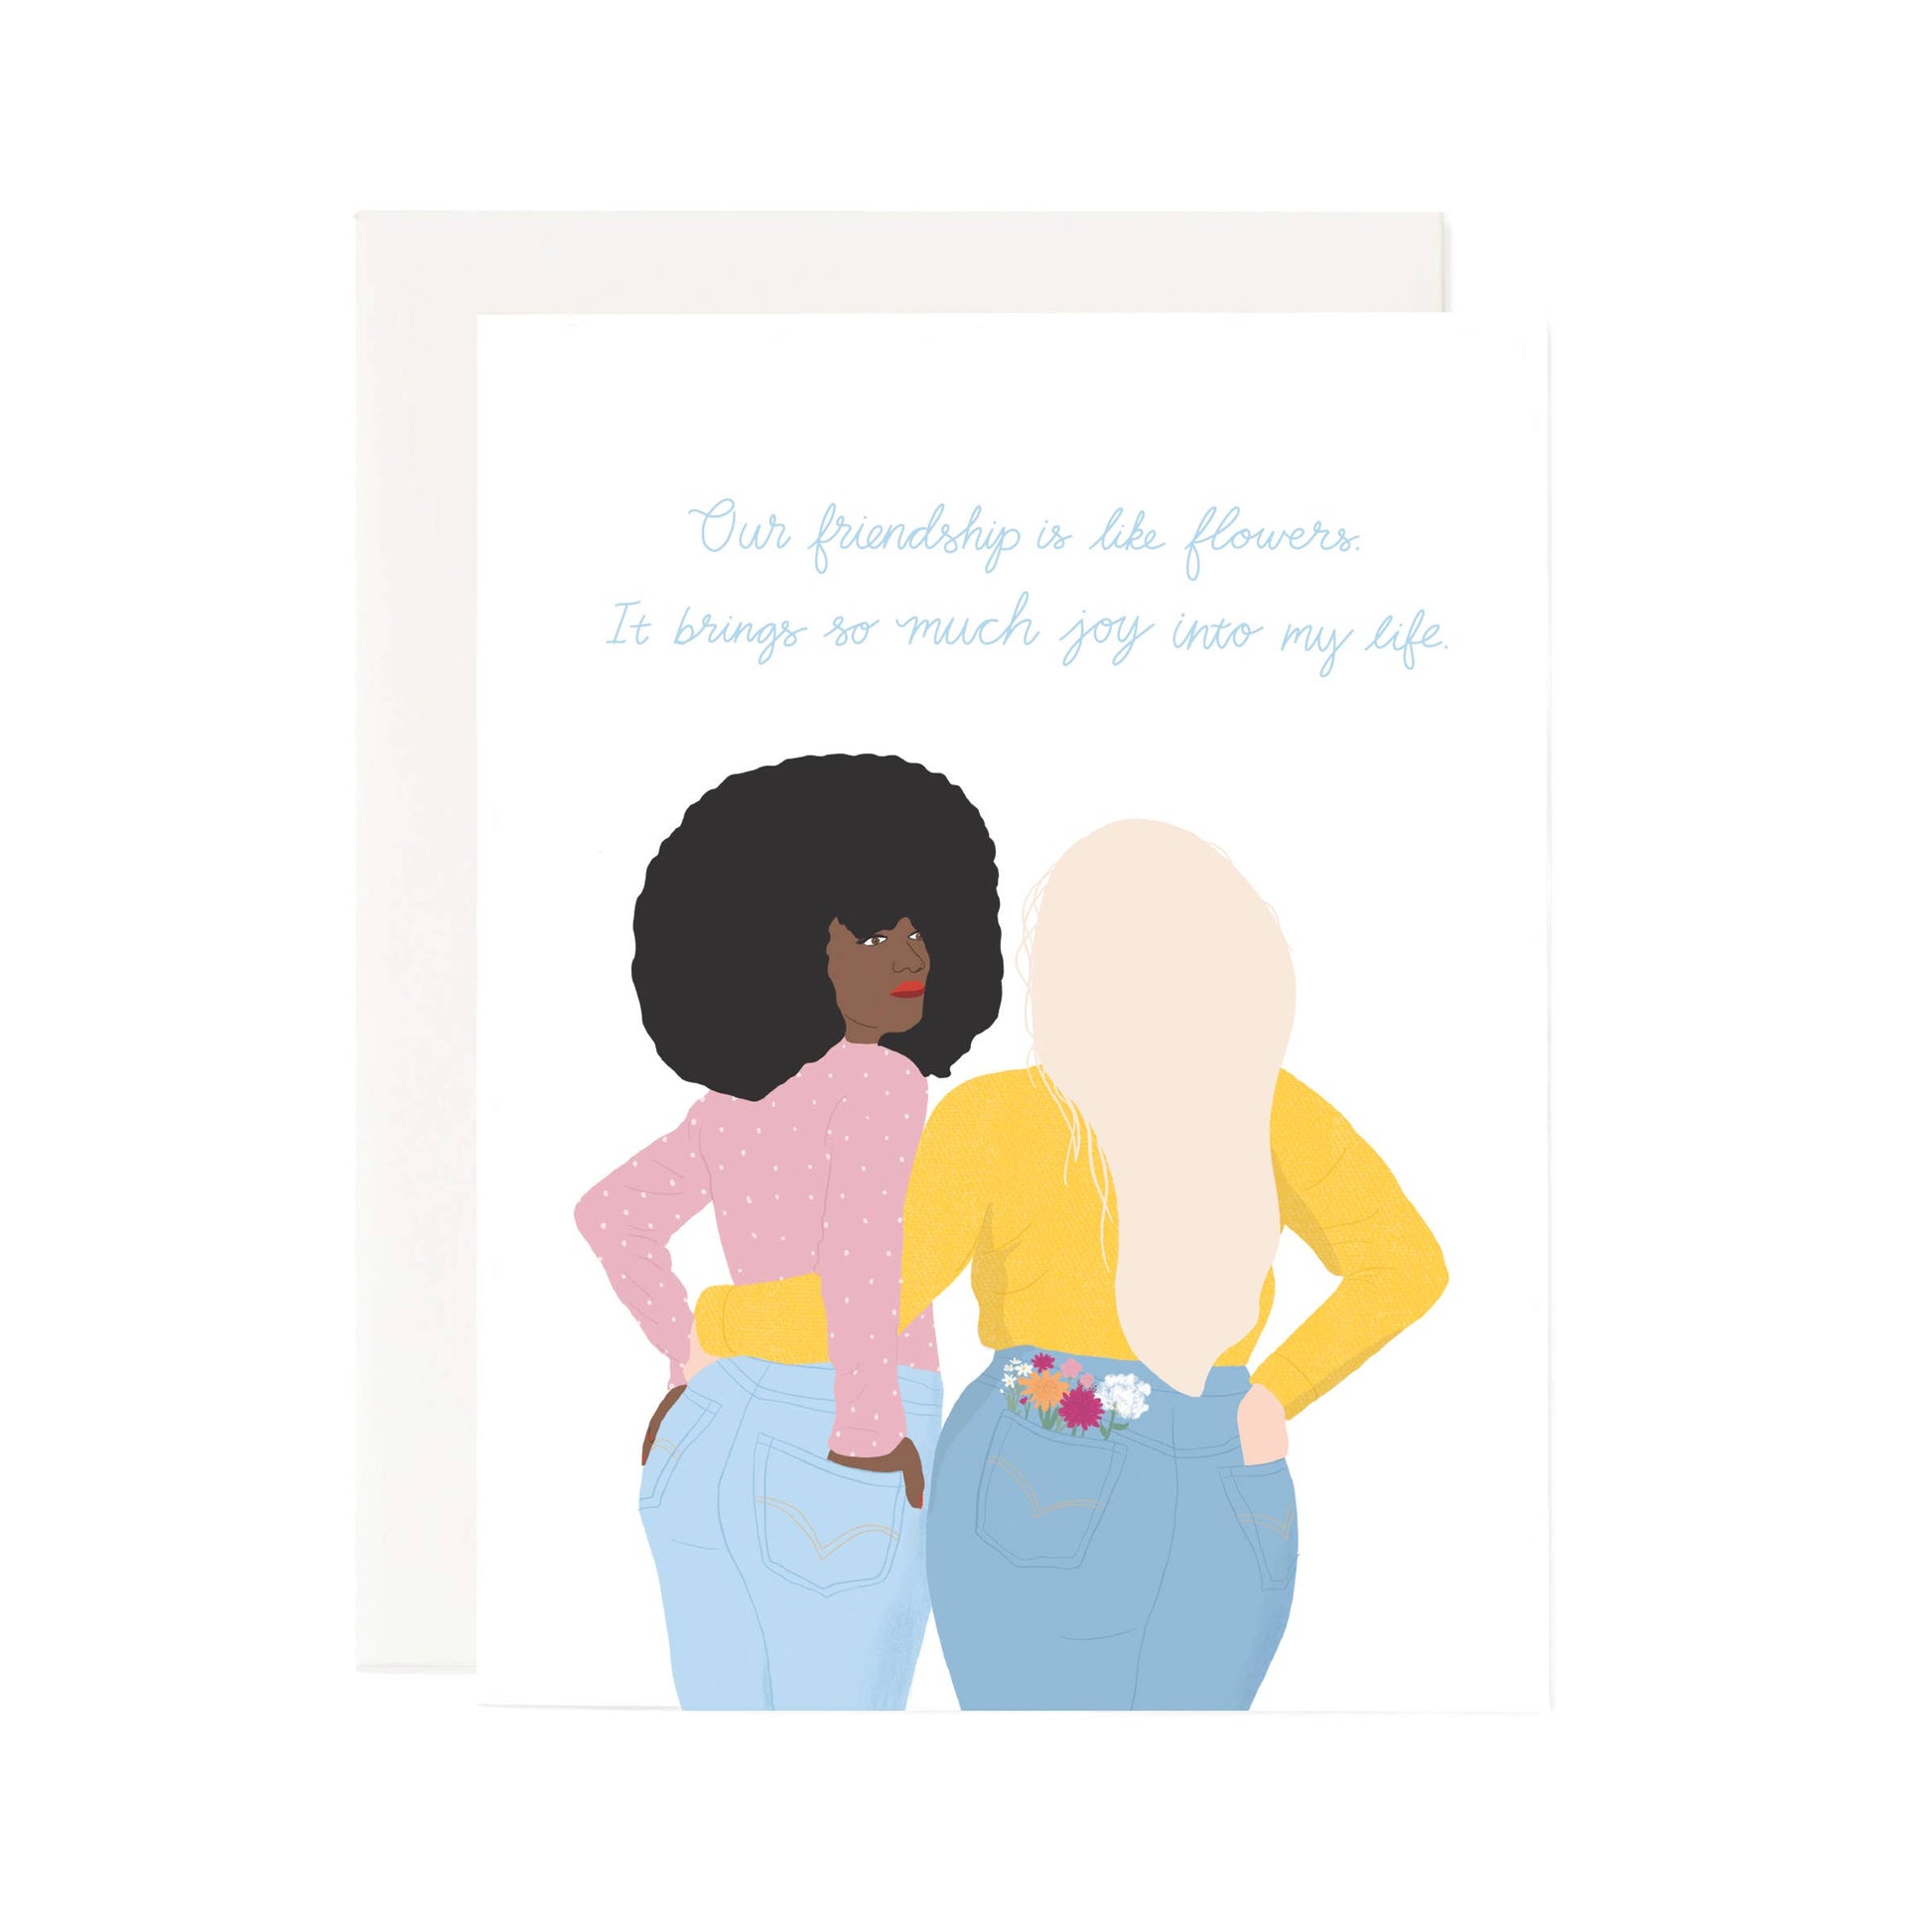 "Our friendship is like flowers it brings so much joy into my life" with a drawing of two woman standing beside each other. One woman has a black afro and dark skin and the other has blond hair and light skin.